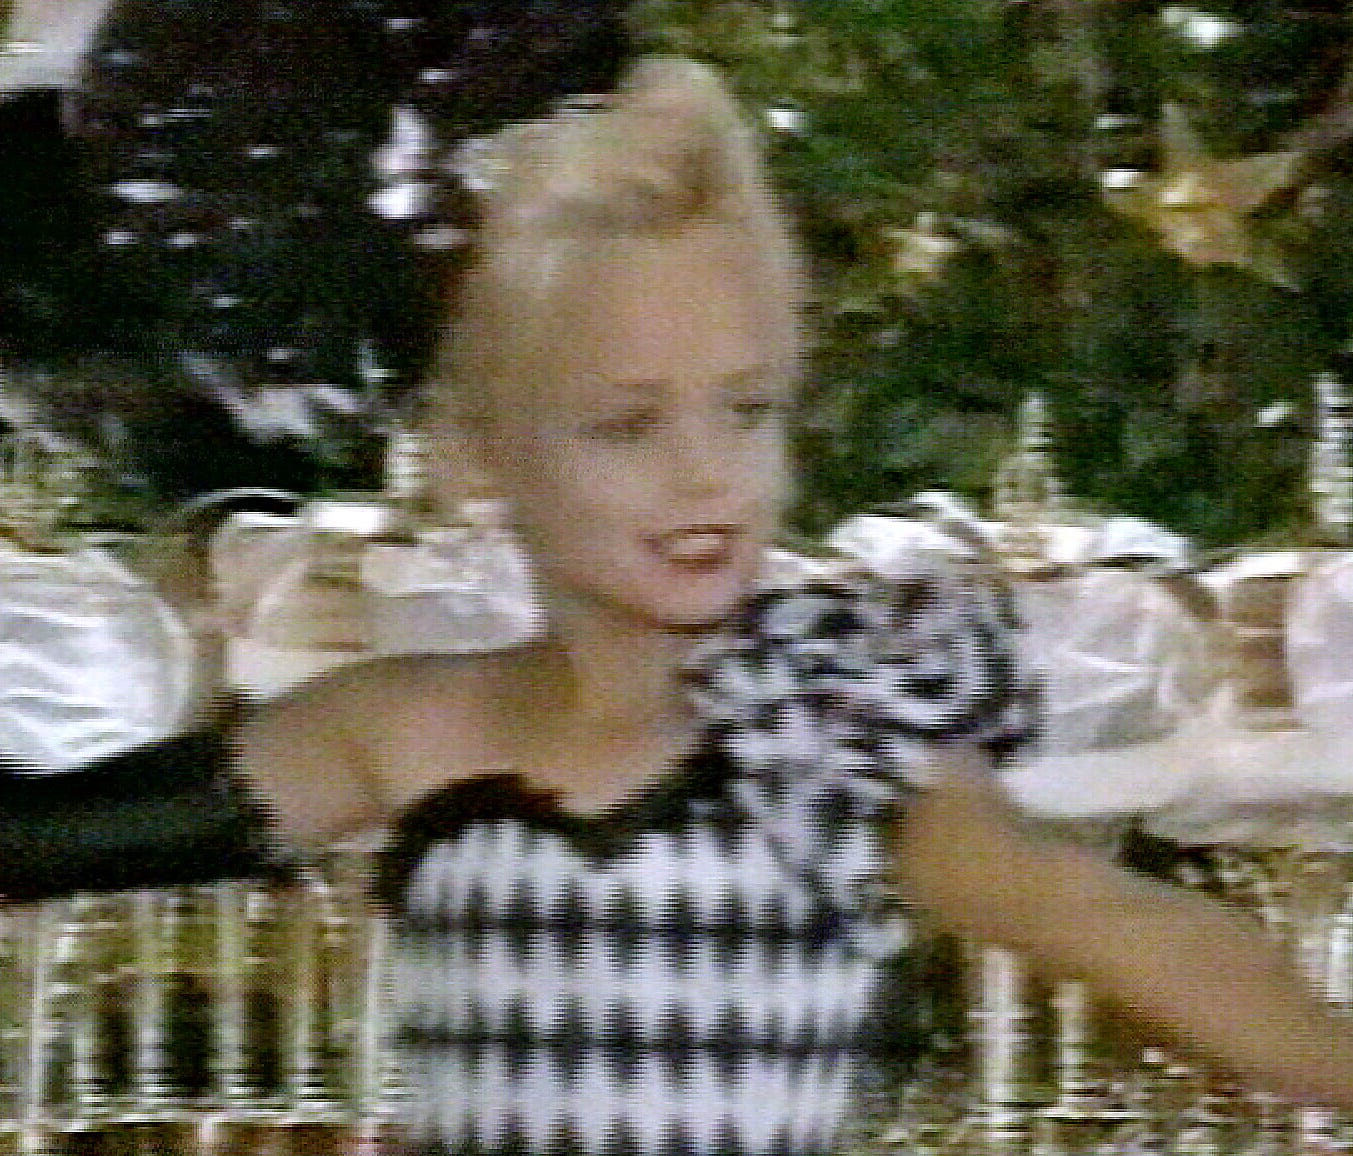 JonBenet Ramsey's brother is suing CBS for $750 million for ruining his reputation.